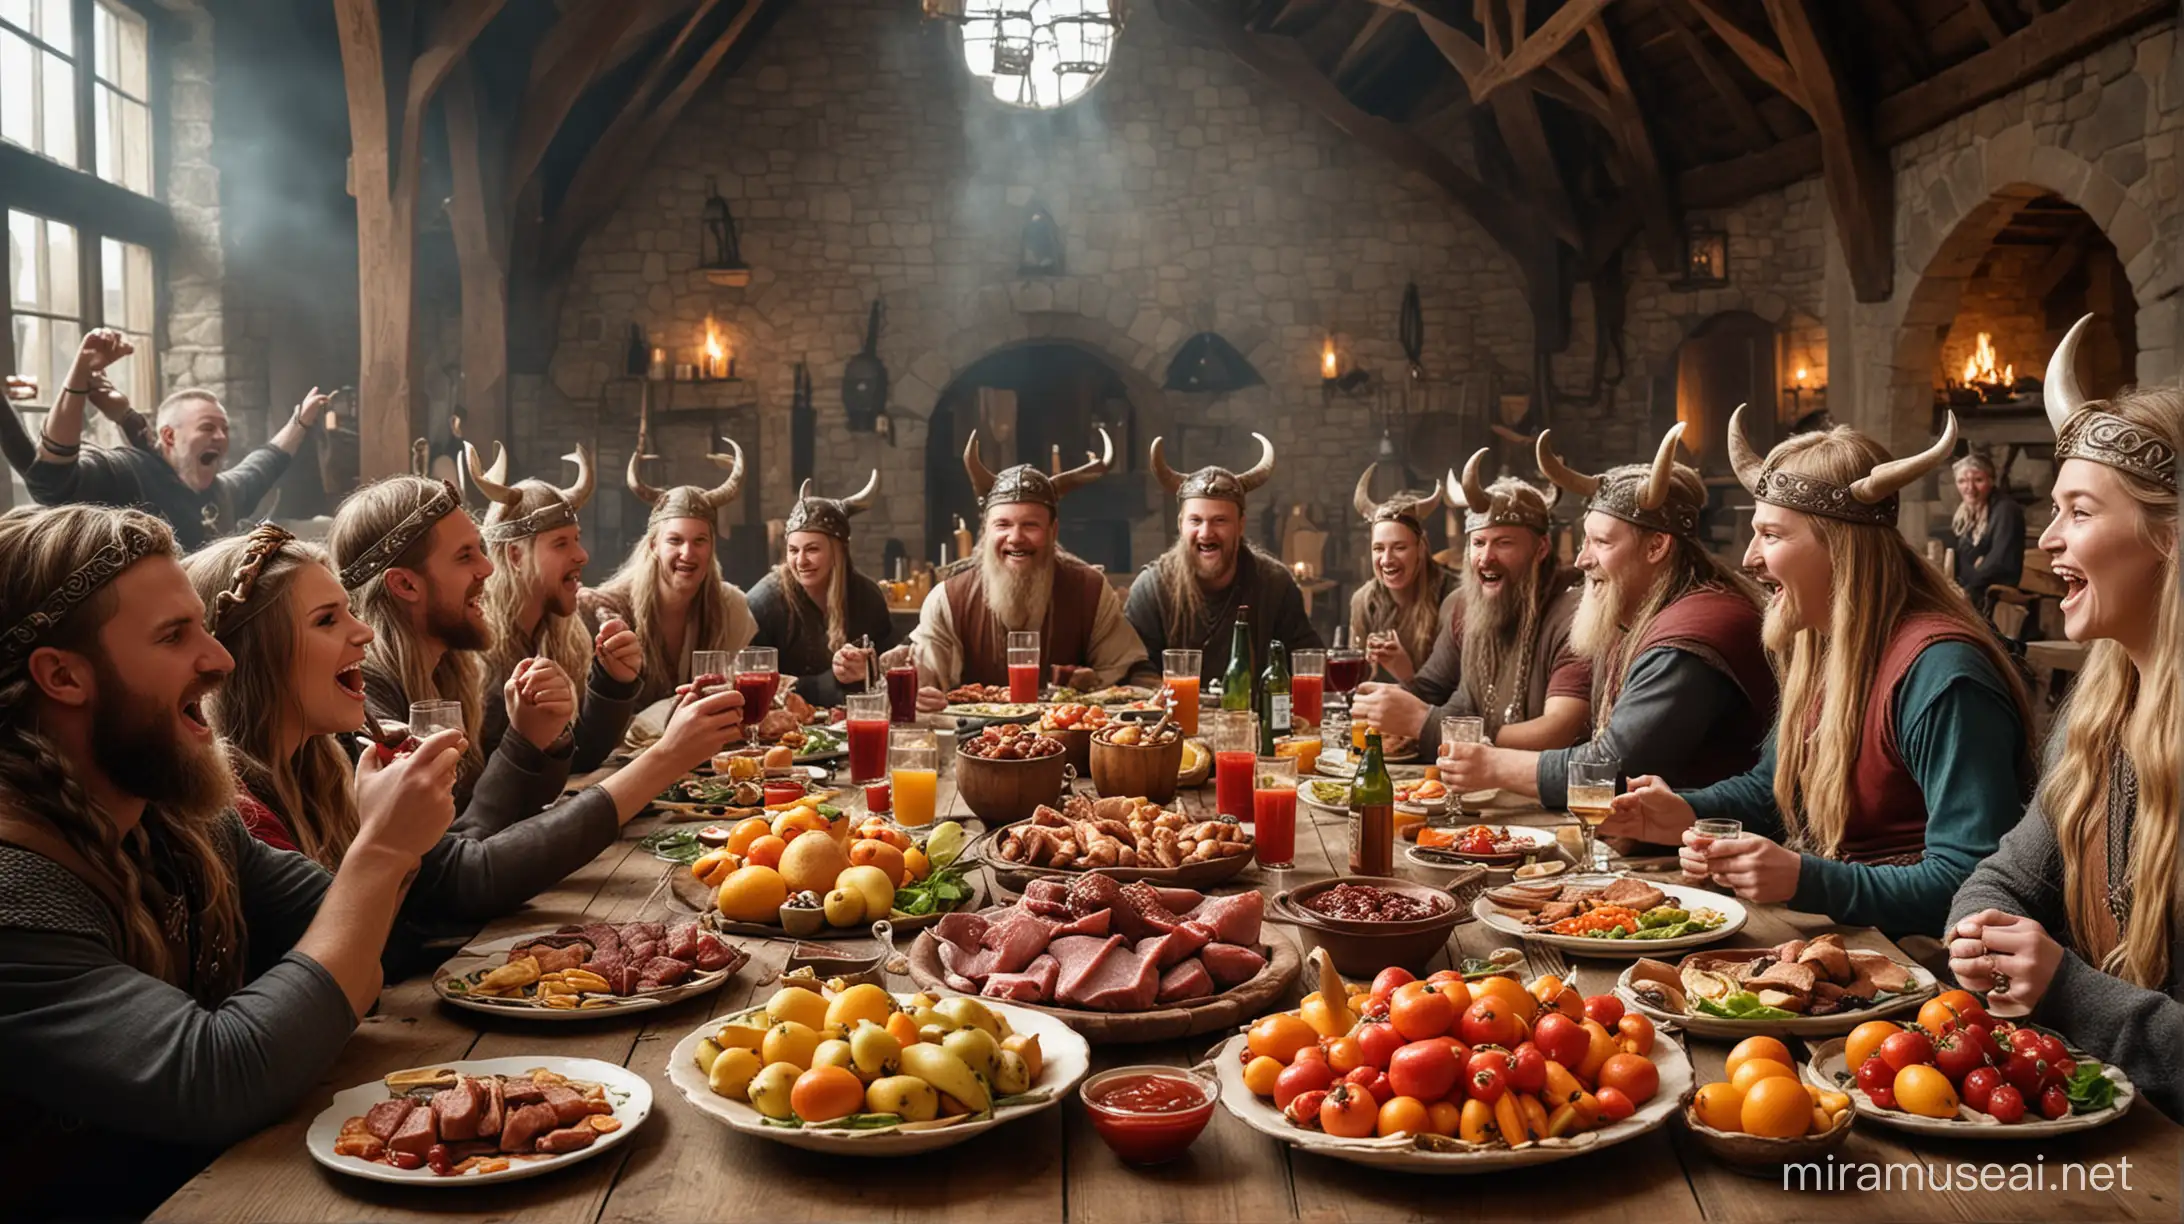 Viking Feast Celebration with Joyous Revelry and Hearty Fare